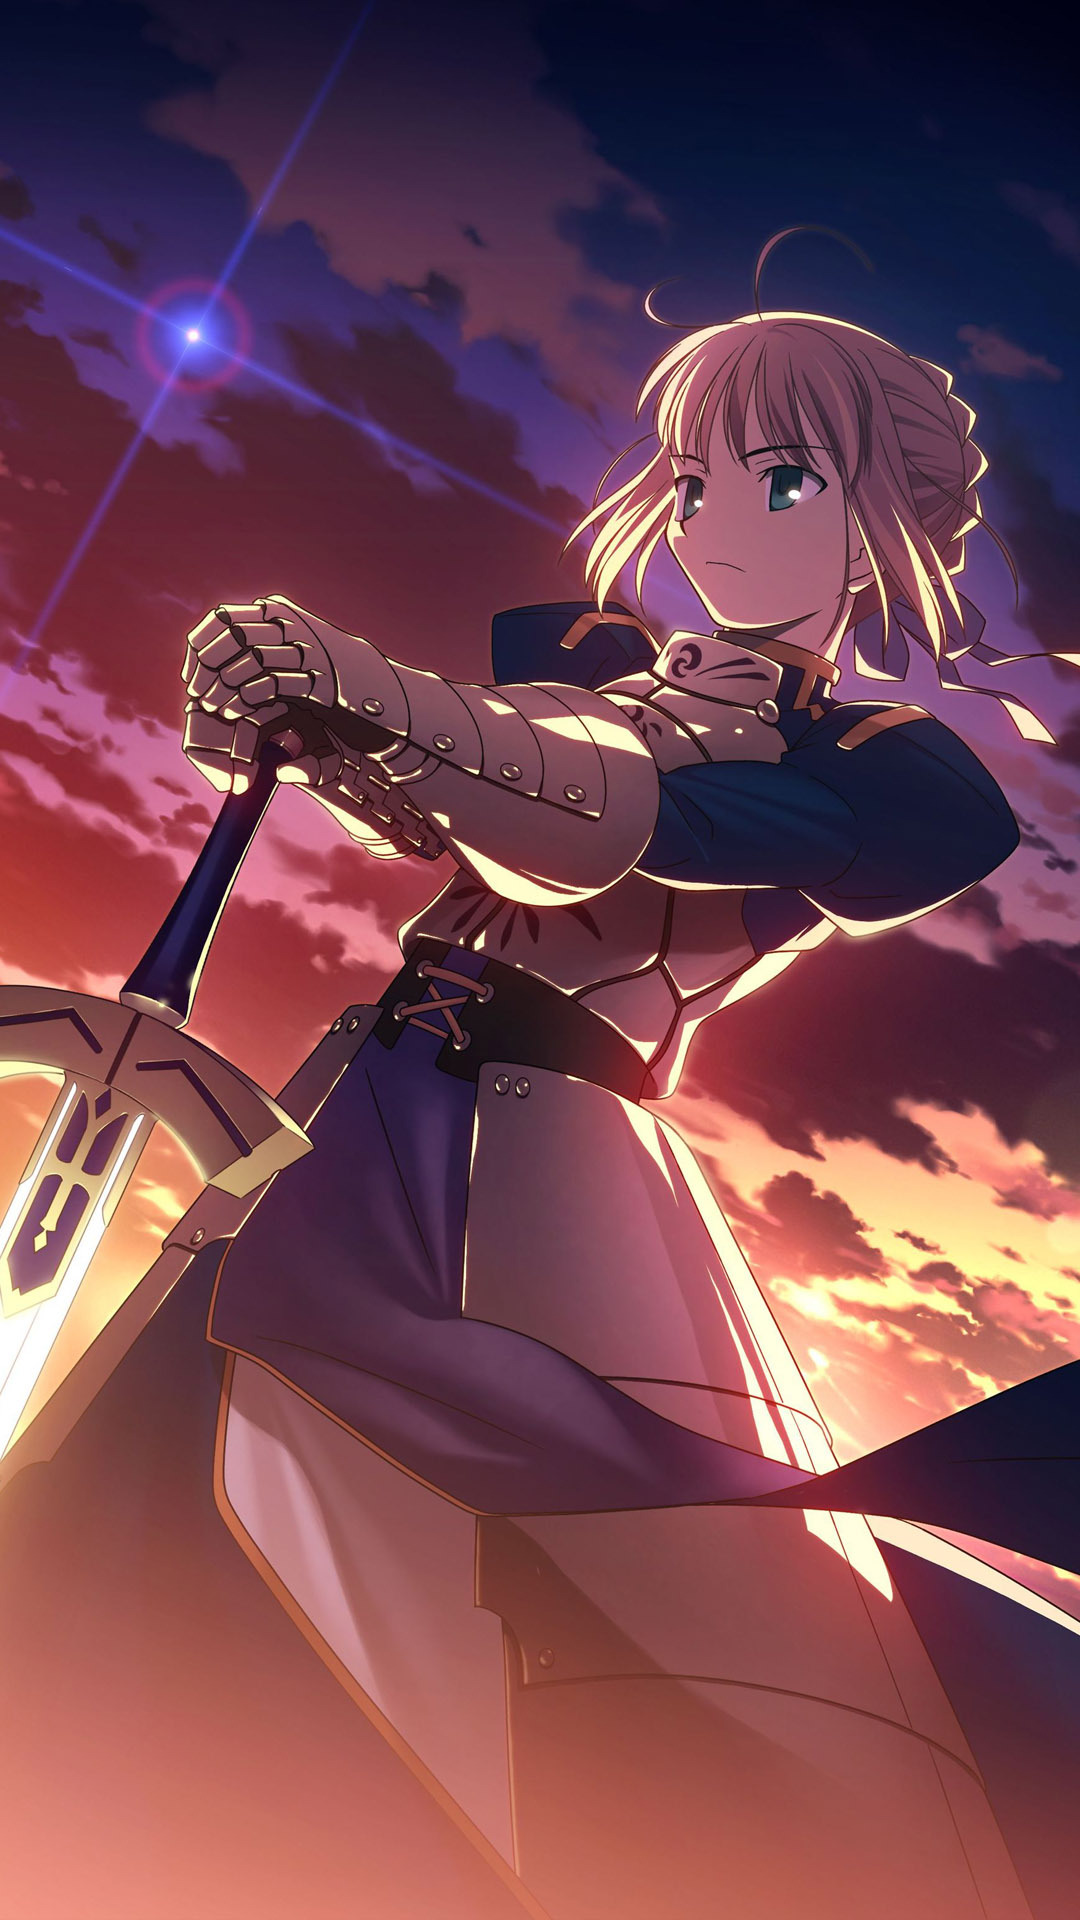 View Anime Fate Wallpaper Iphone Background Jasmanime